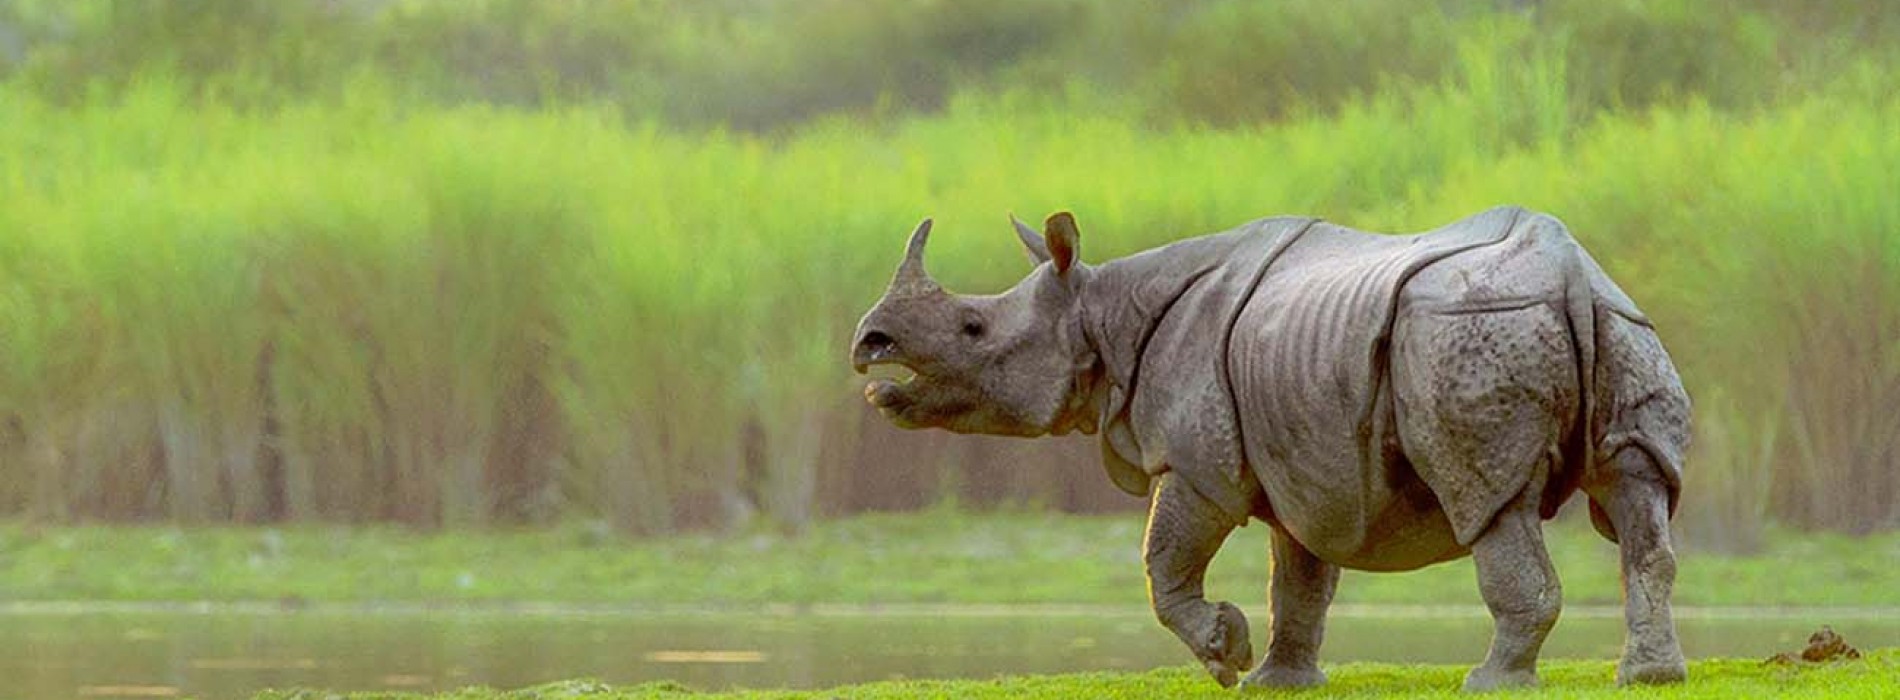 Kaziranga National Park in Assam not covered under the ‘Adopt a Heritage’ scheme: Tourism Minister